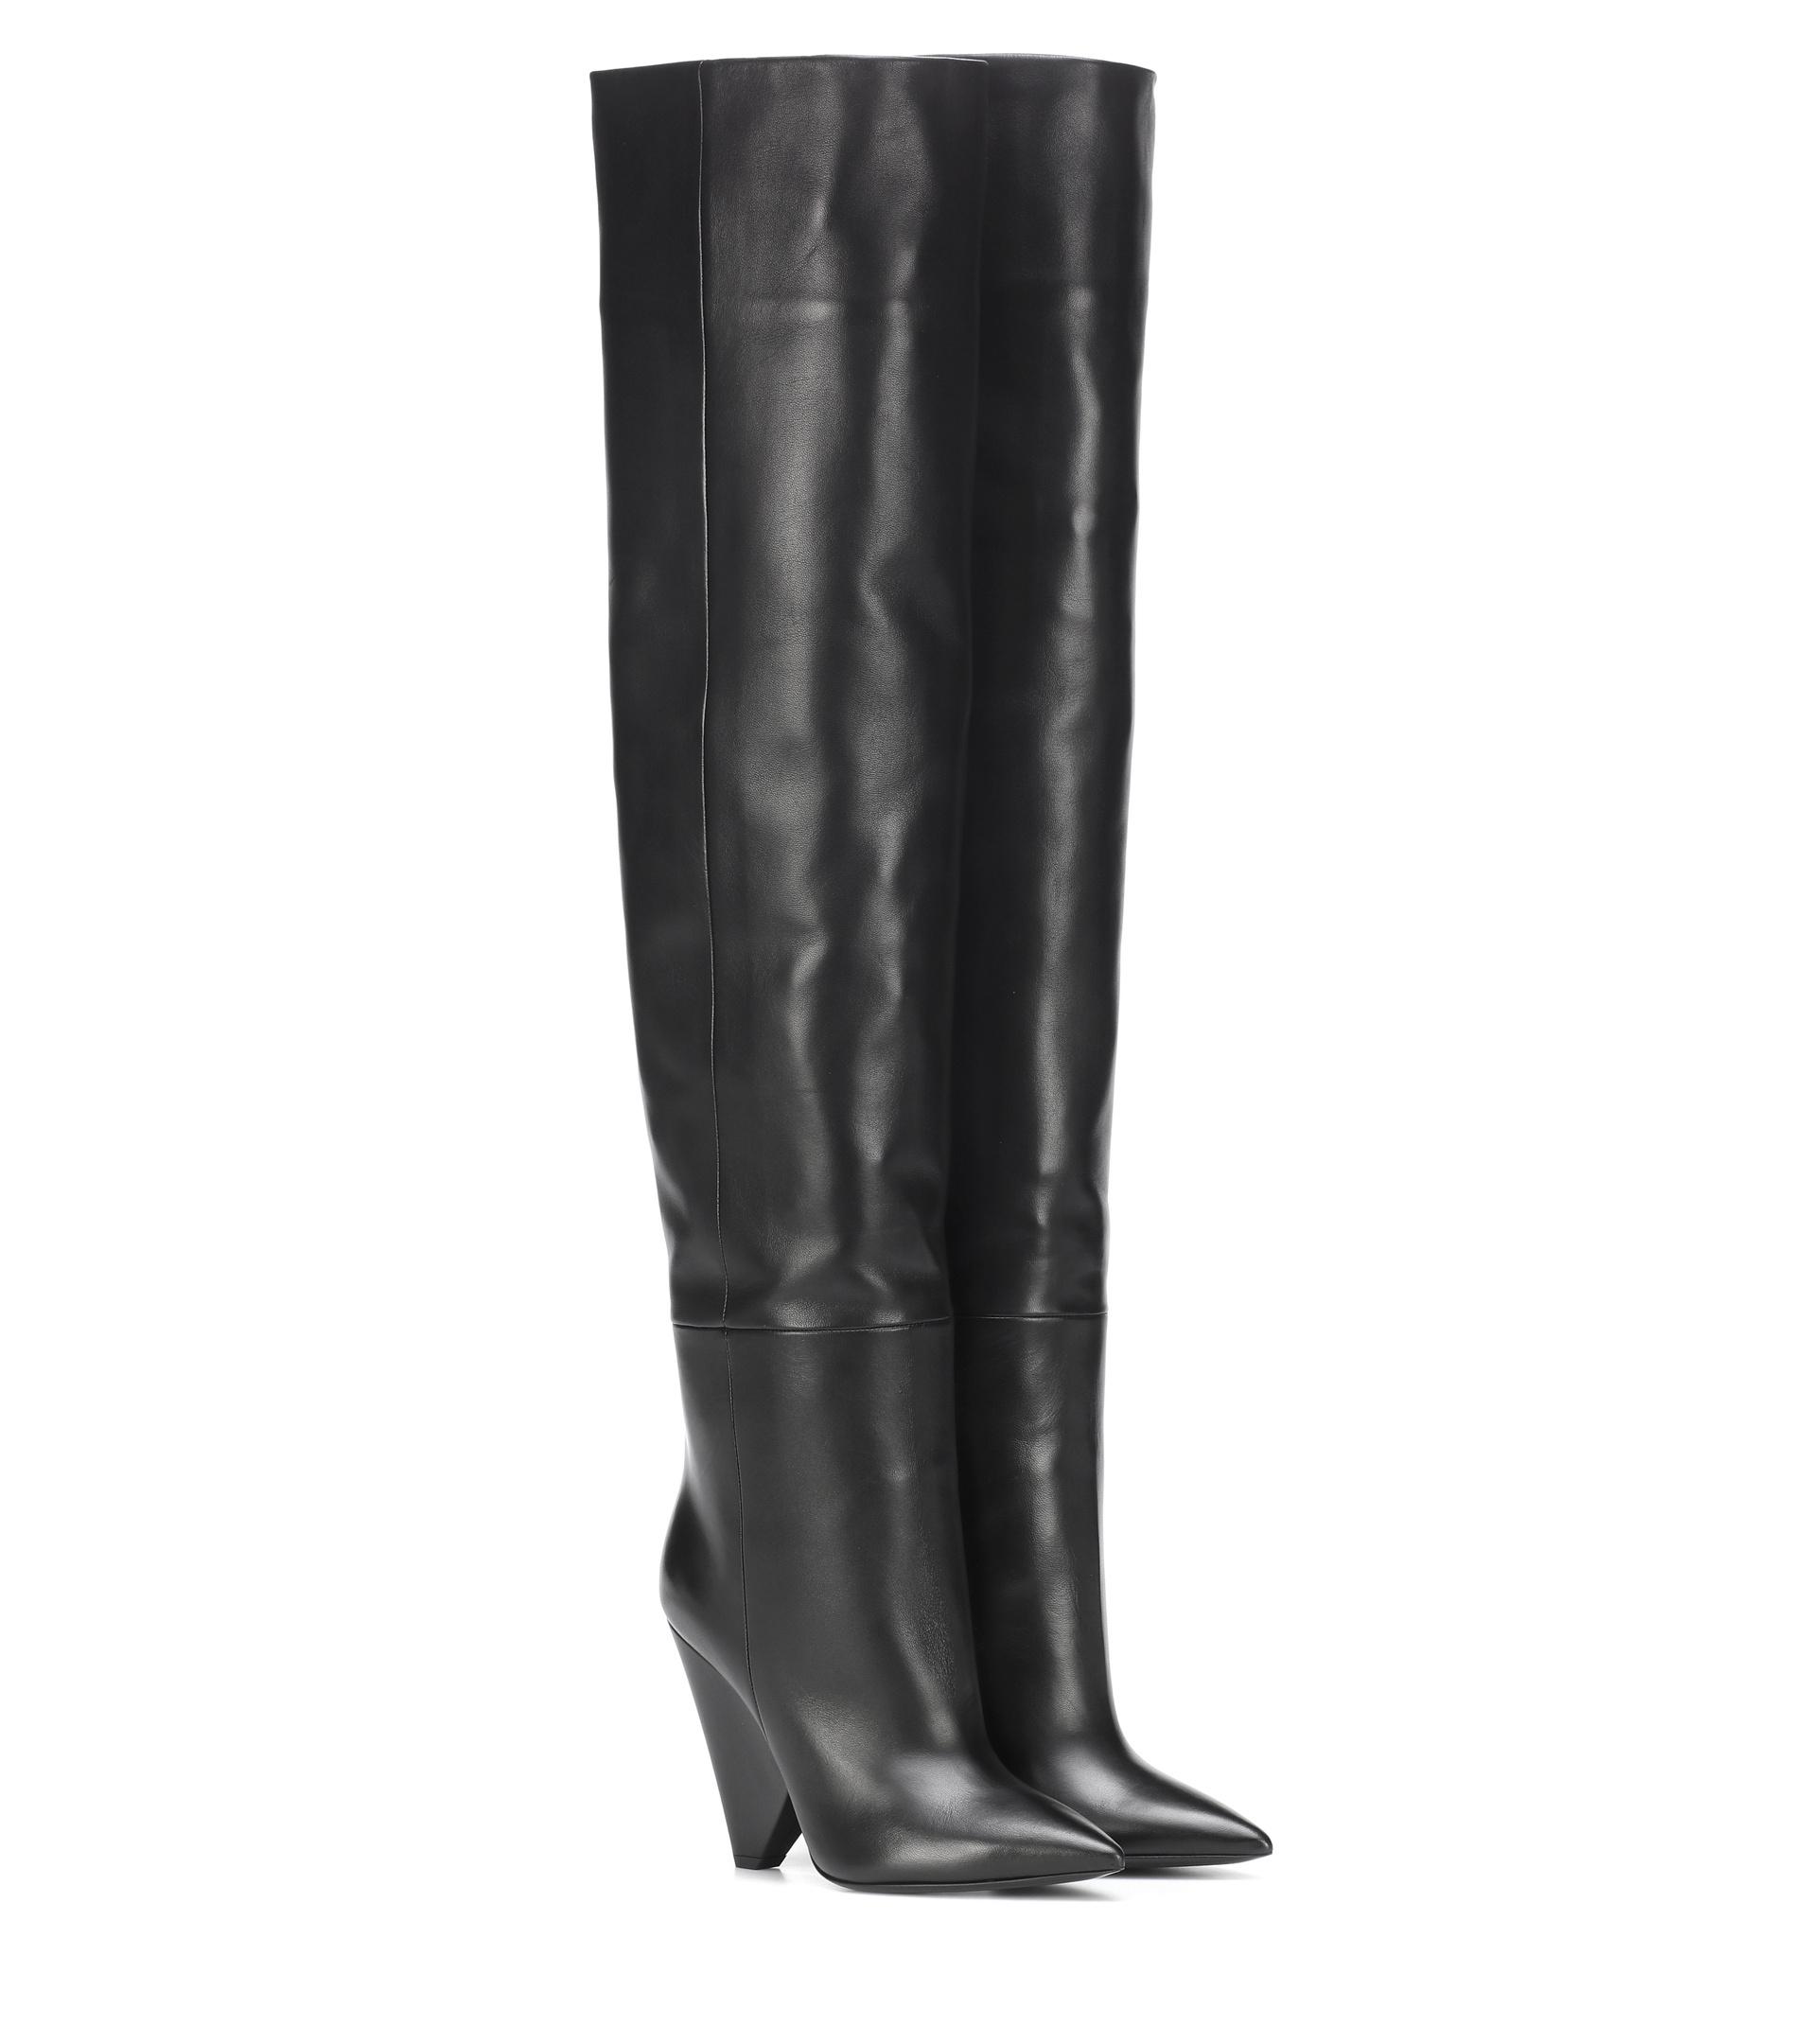 Saint Laurent Niki 105 Leather Boots in Black - Save 79% - Lyst